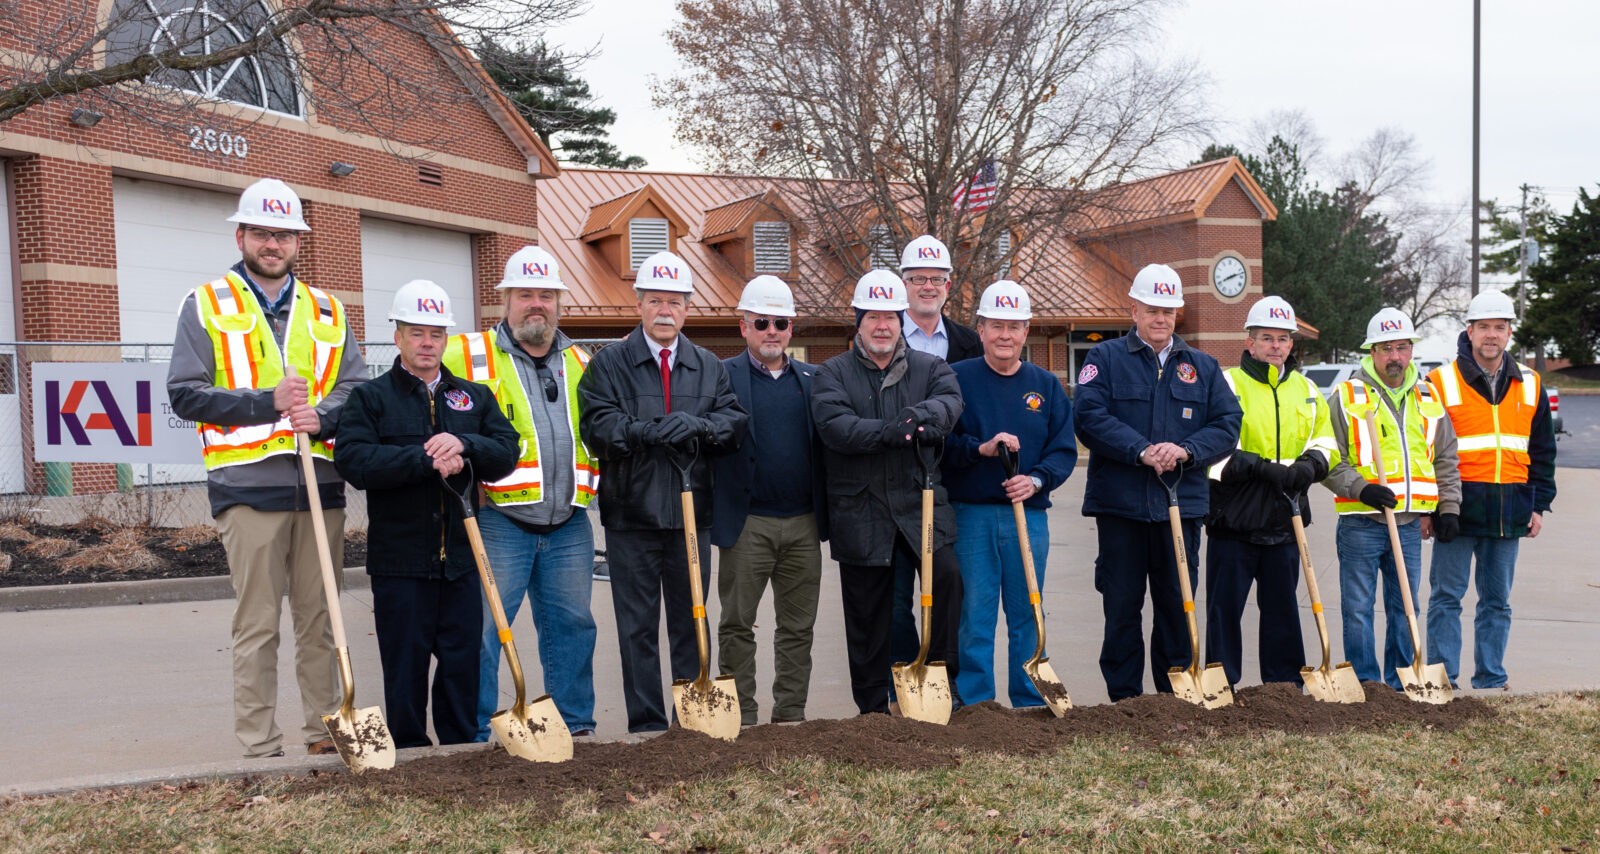 Maryland Heights Fire Protection District Headquarters Engine House One groundbreaking event 11 men with shovels and KAI hard hats